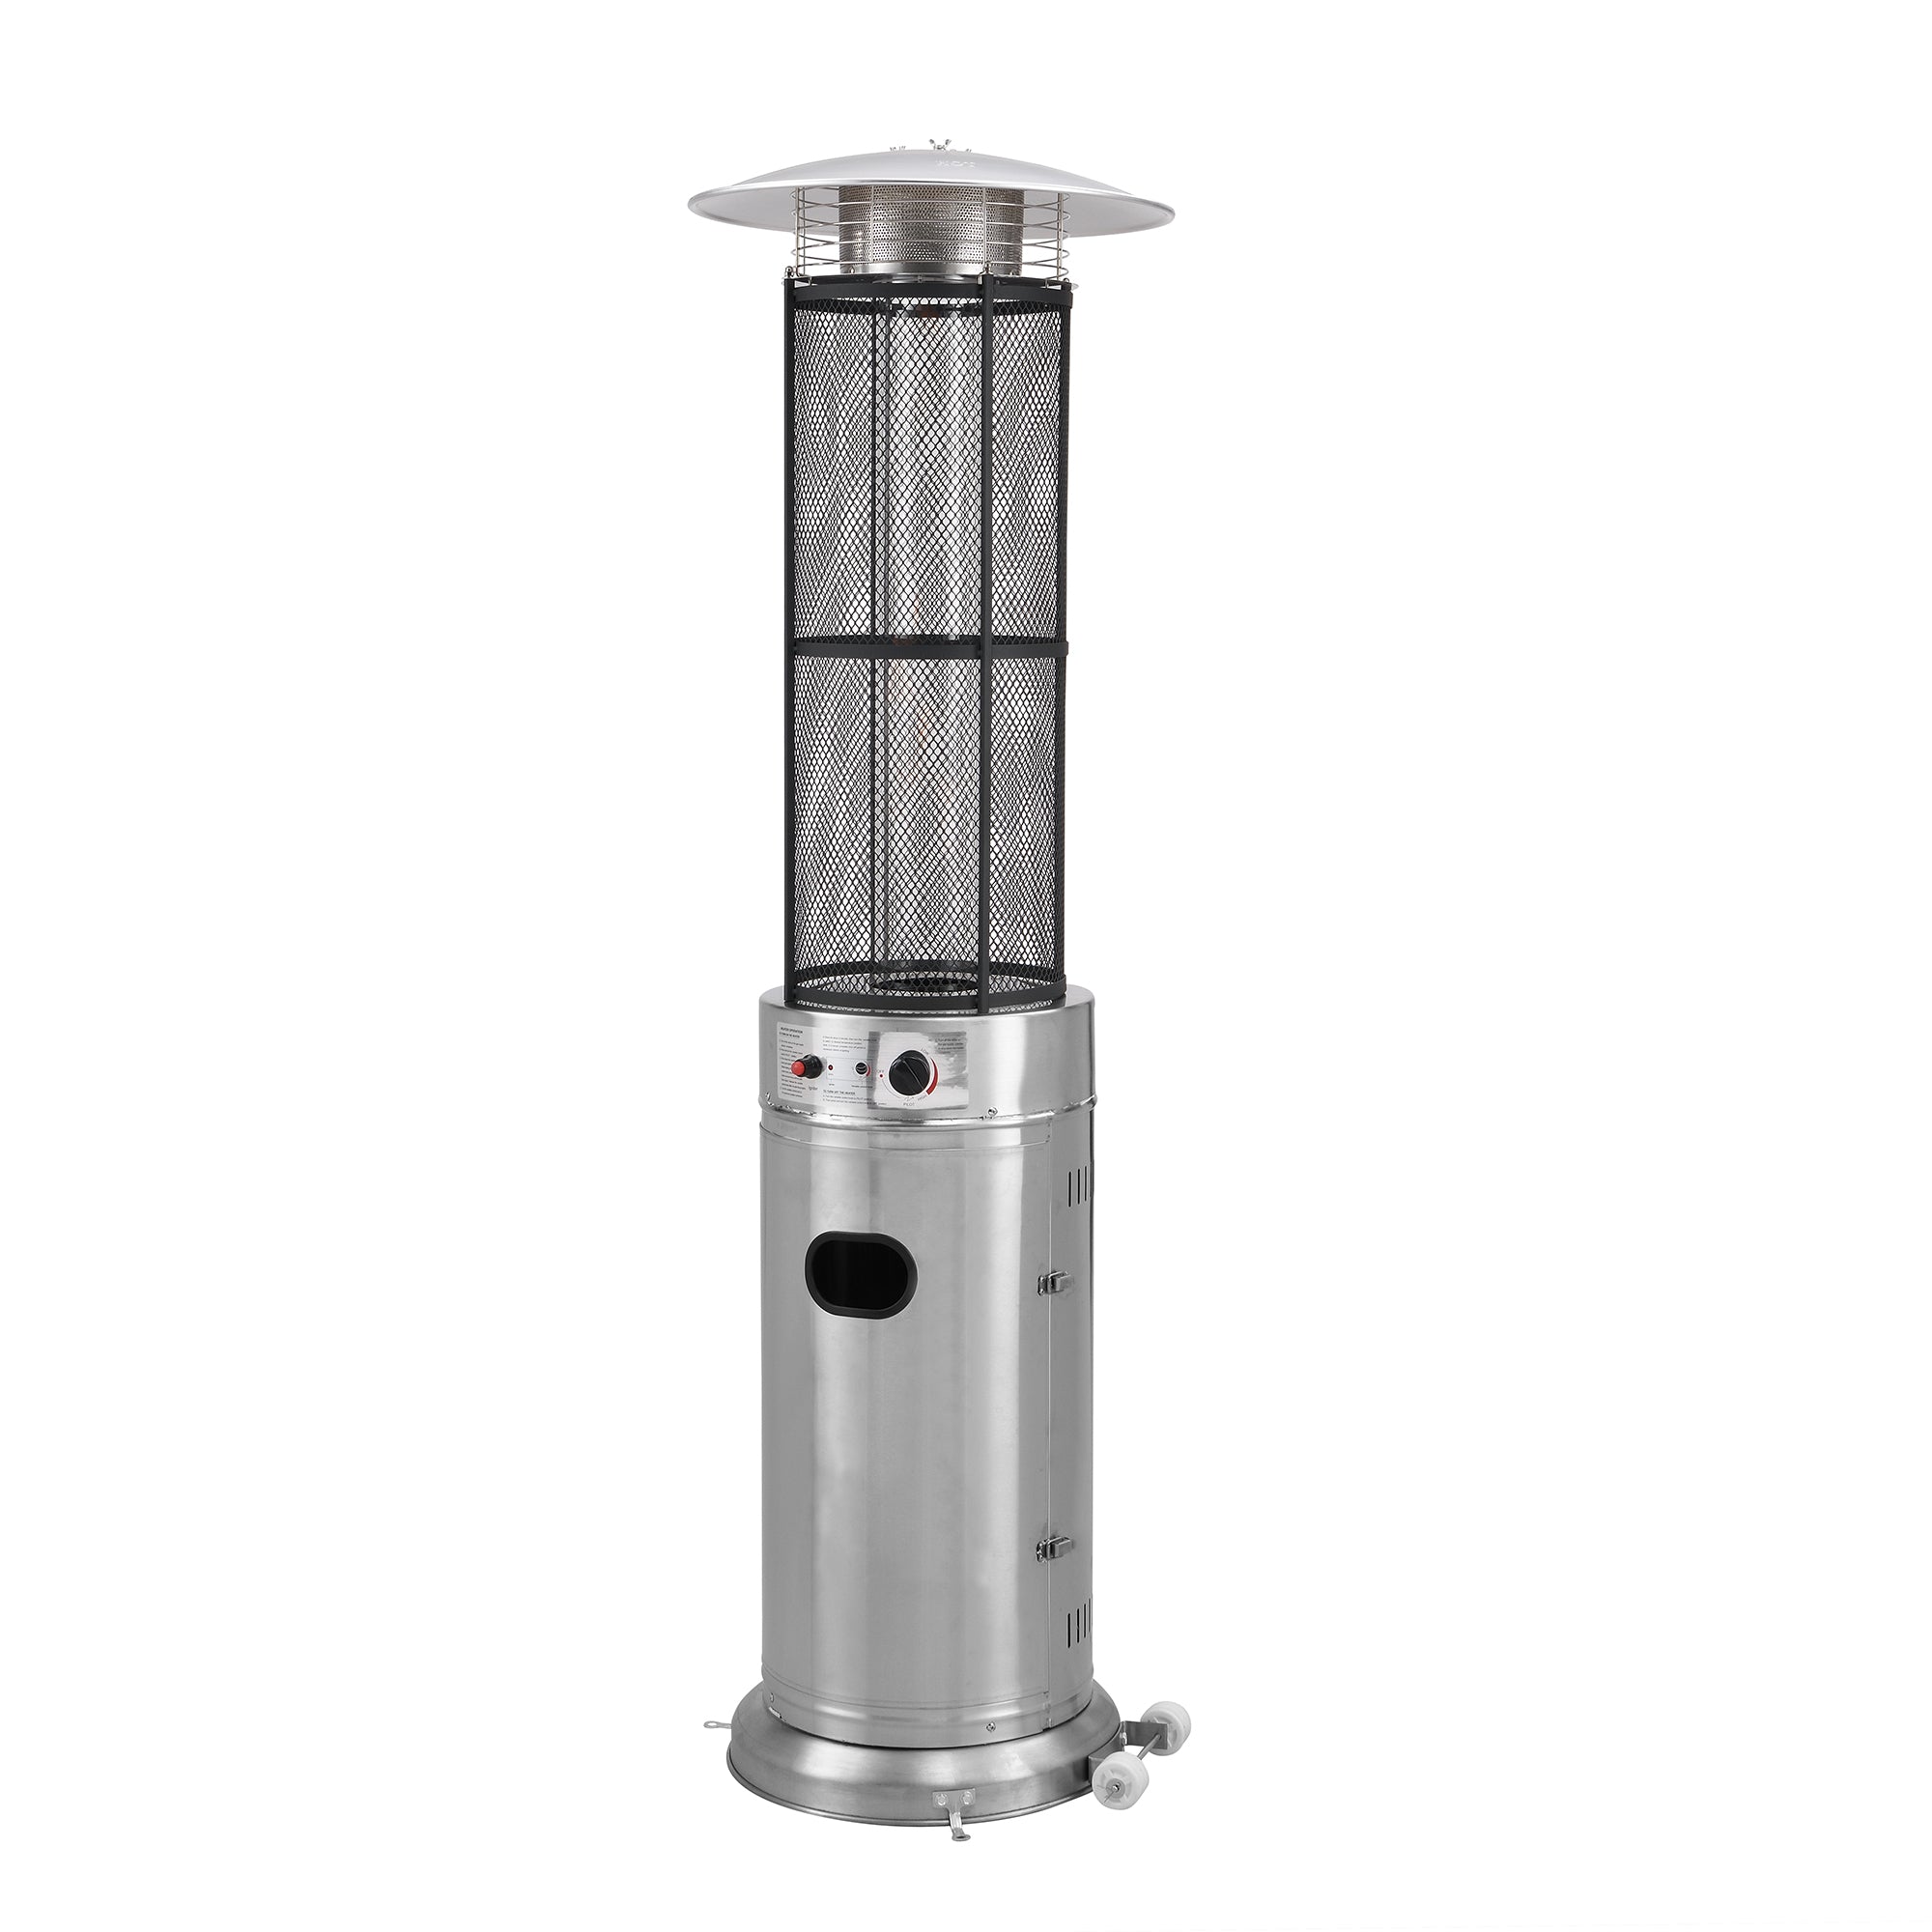 1.8m Tall Freestanding Circle Frame Patio Heater in Silver Stainless Steel 11KW